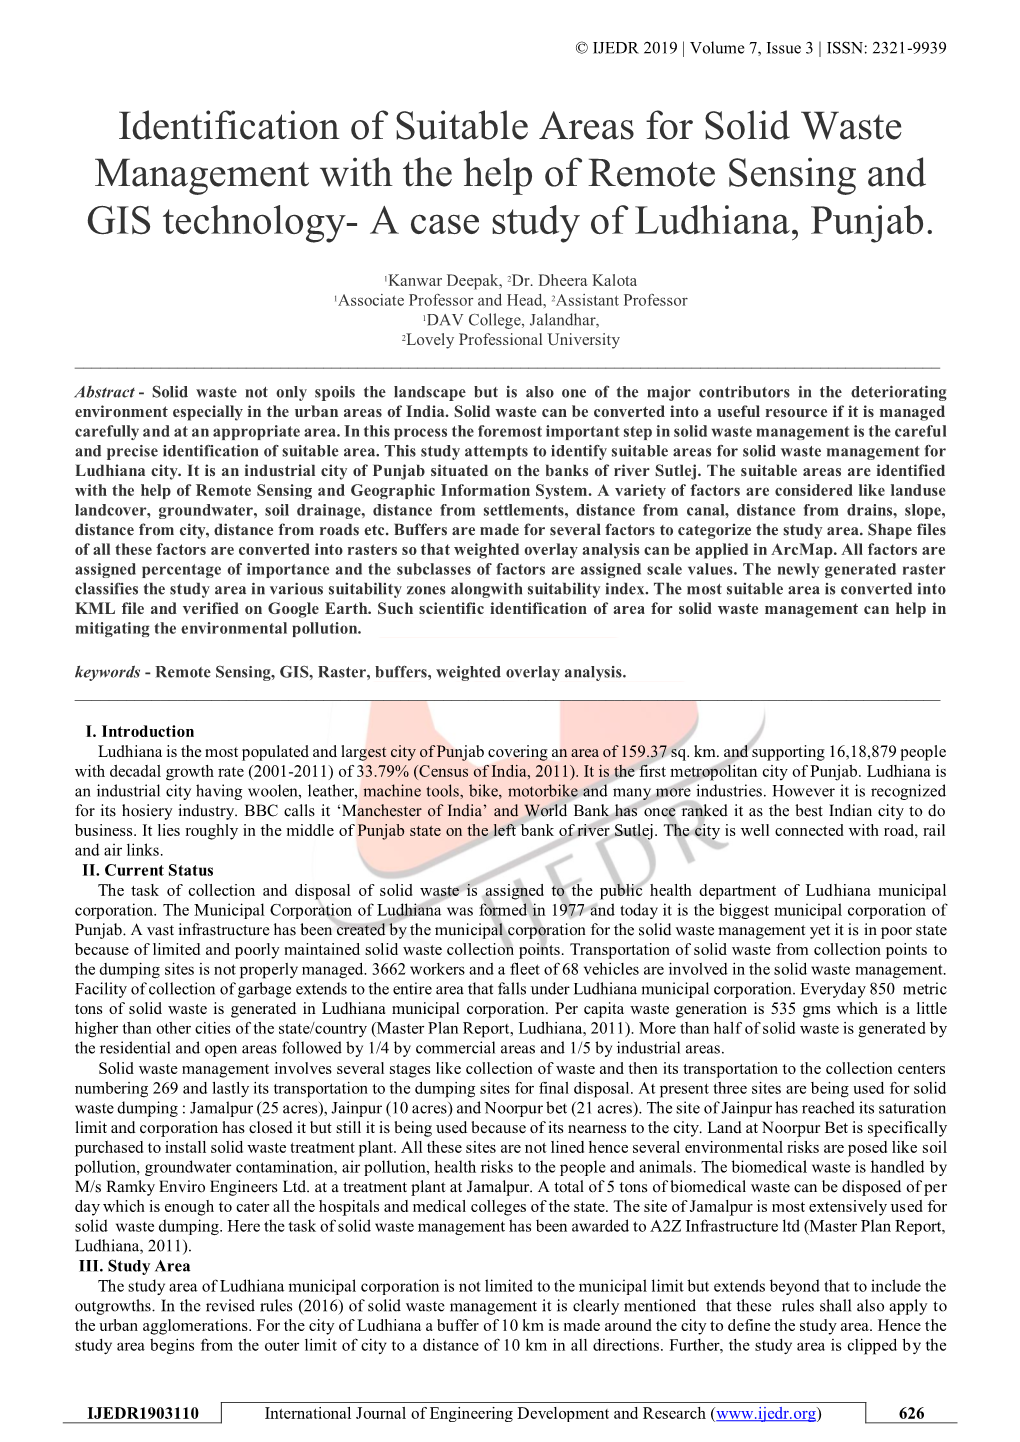 Identification of Suitable Areas for Solid Waste Management with the Help of Remote Sensing and GIS Technology- a Case Study of Ludhiana, Punjab